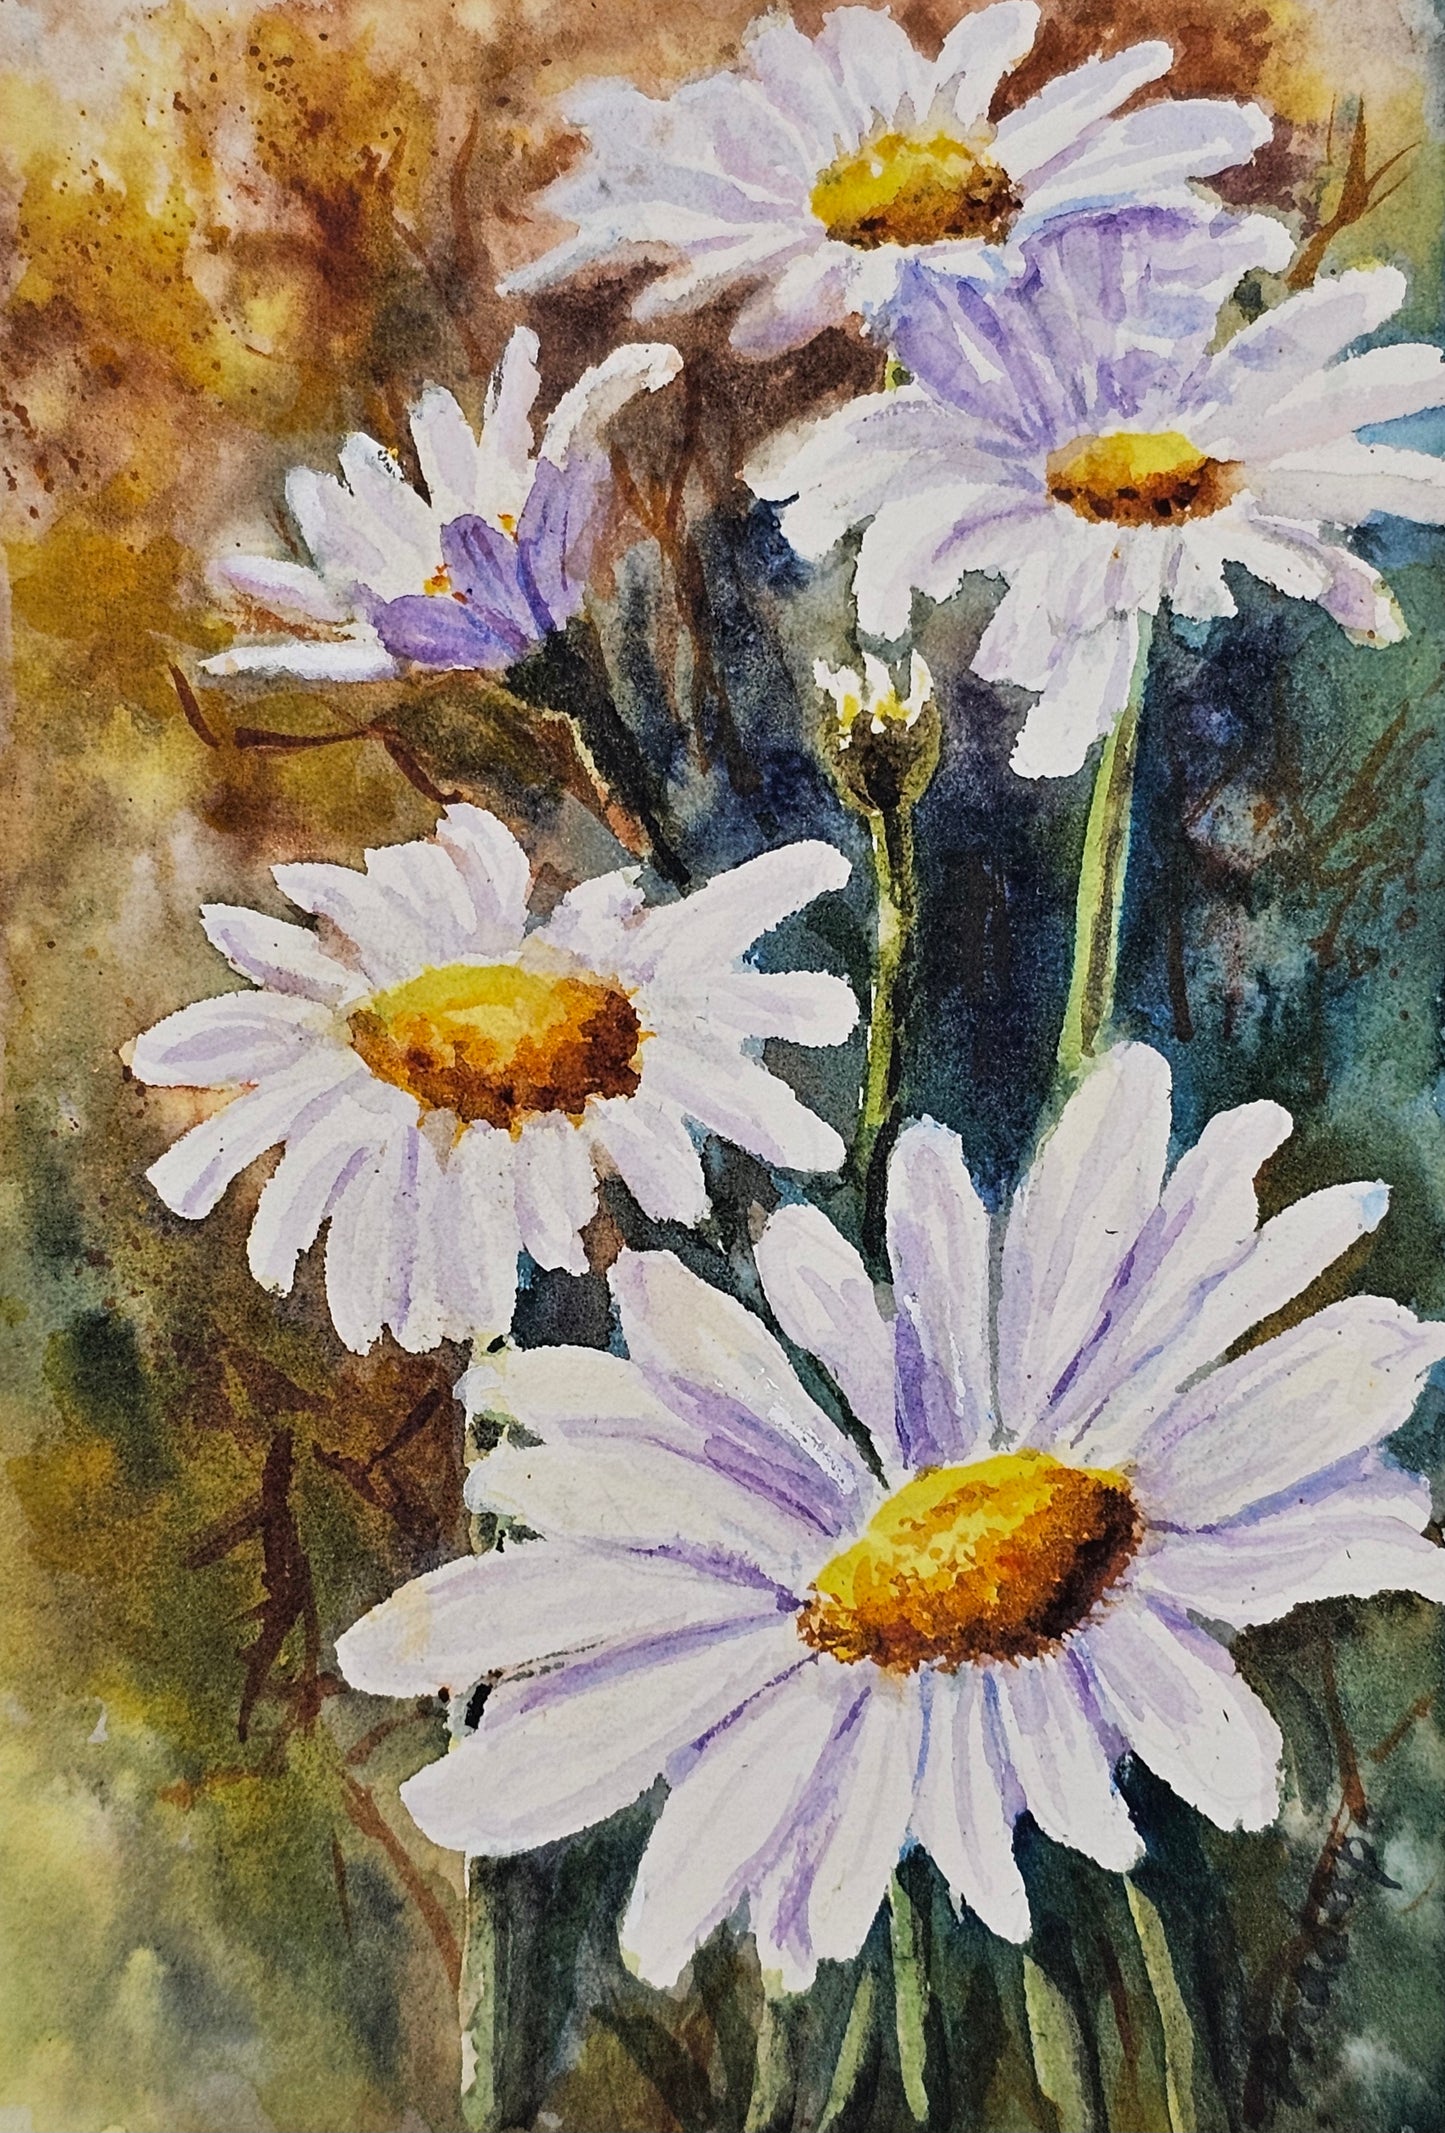 Late Summer Memories-original watercolour painting- 4x6 inches